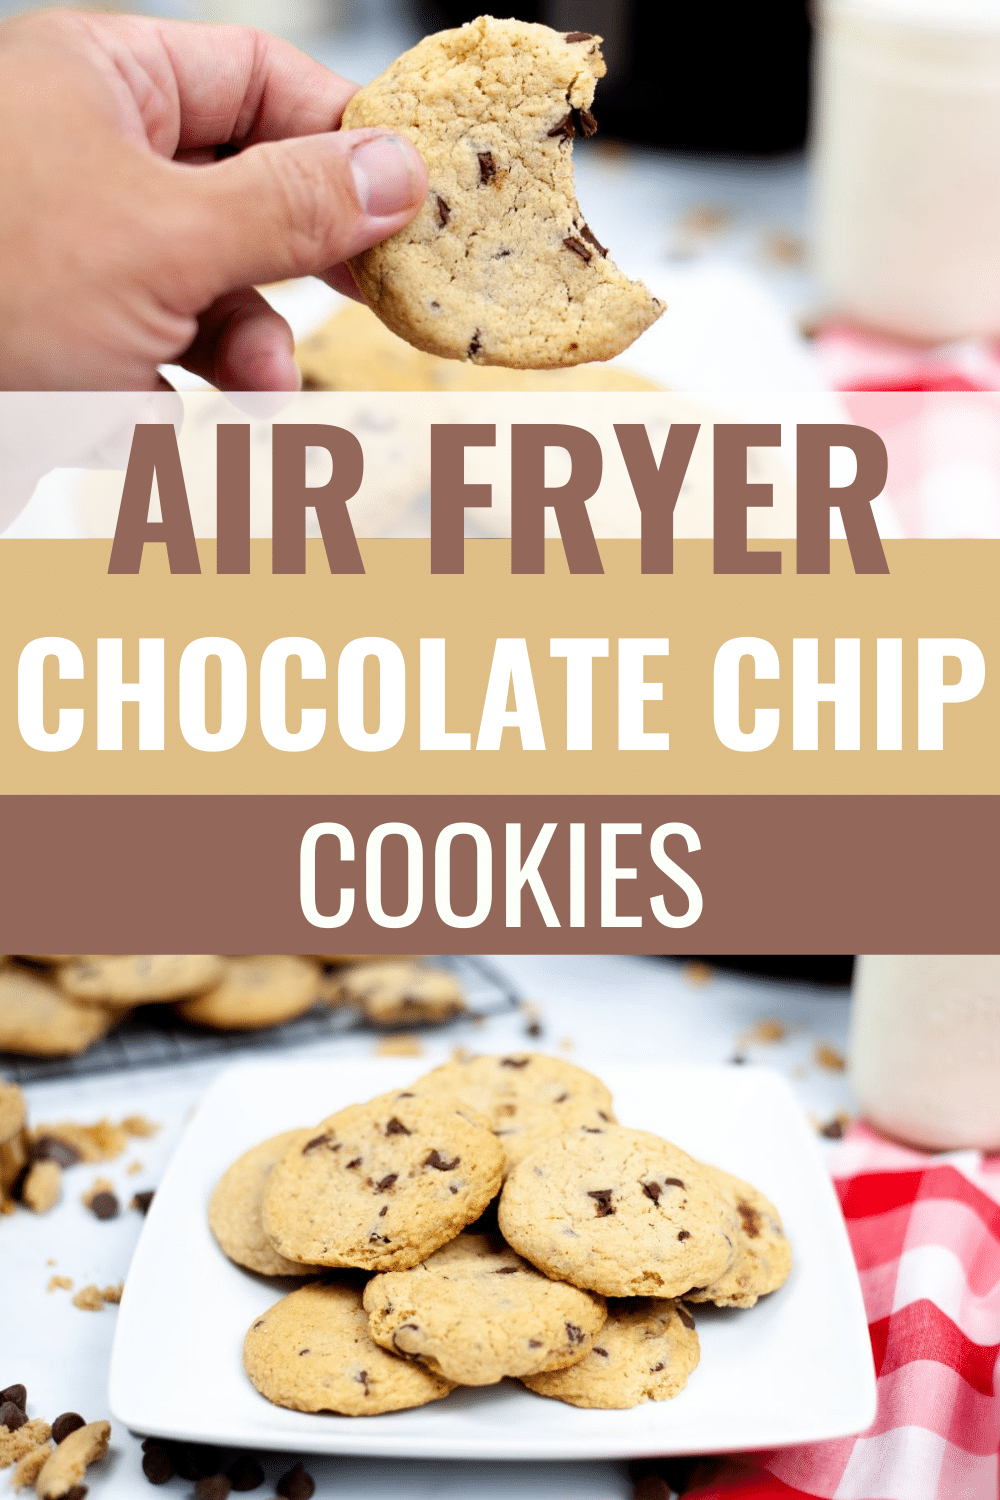 Air Fryer Chocolate Chip Cookies are the easiest way to make chocolate chip cookies! You'll have delicious, warm cookies in under 20 minutes. #airfryer #chocolatechipcookies #cookies #chocolatechip #recipe via @wondermomwannab